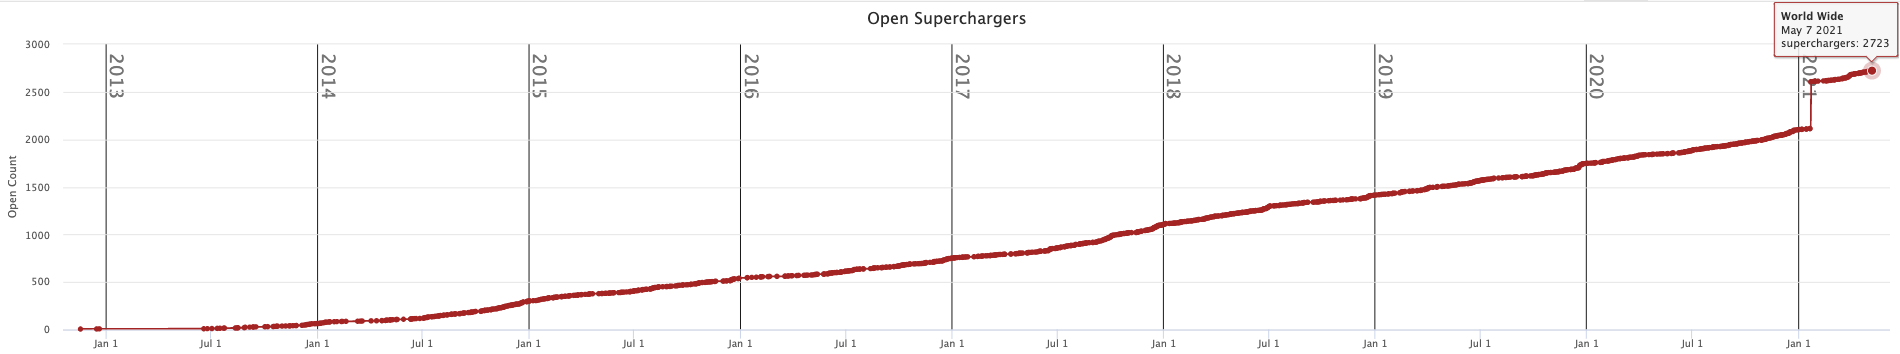 Supercharger stations stats